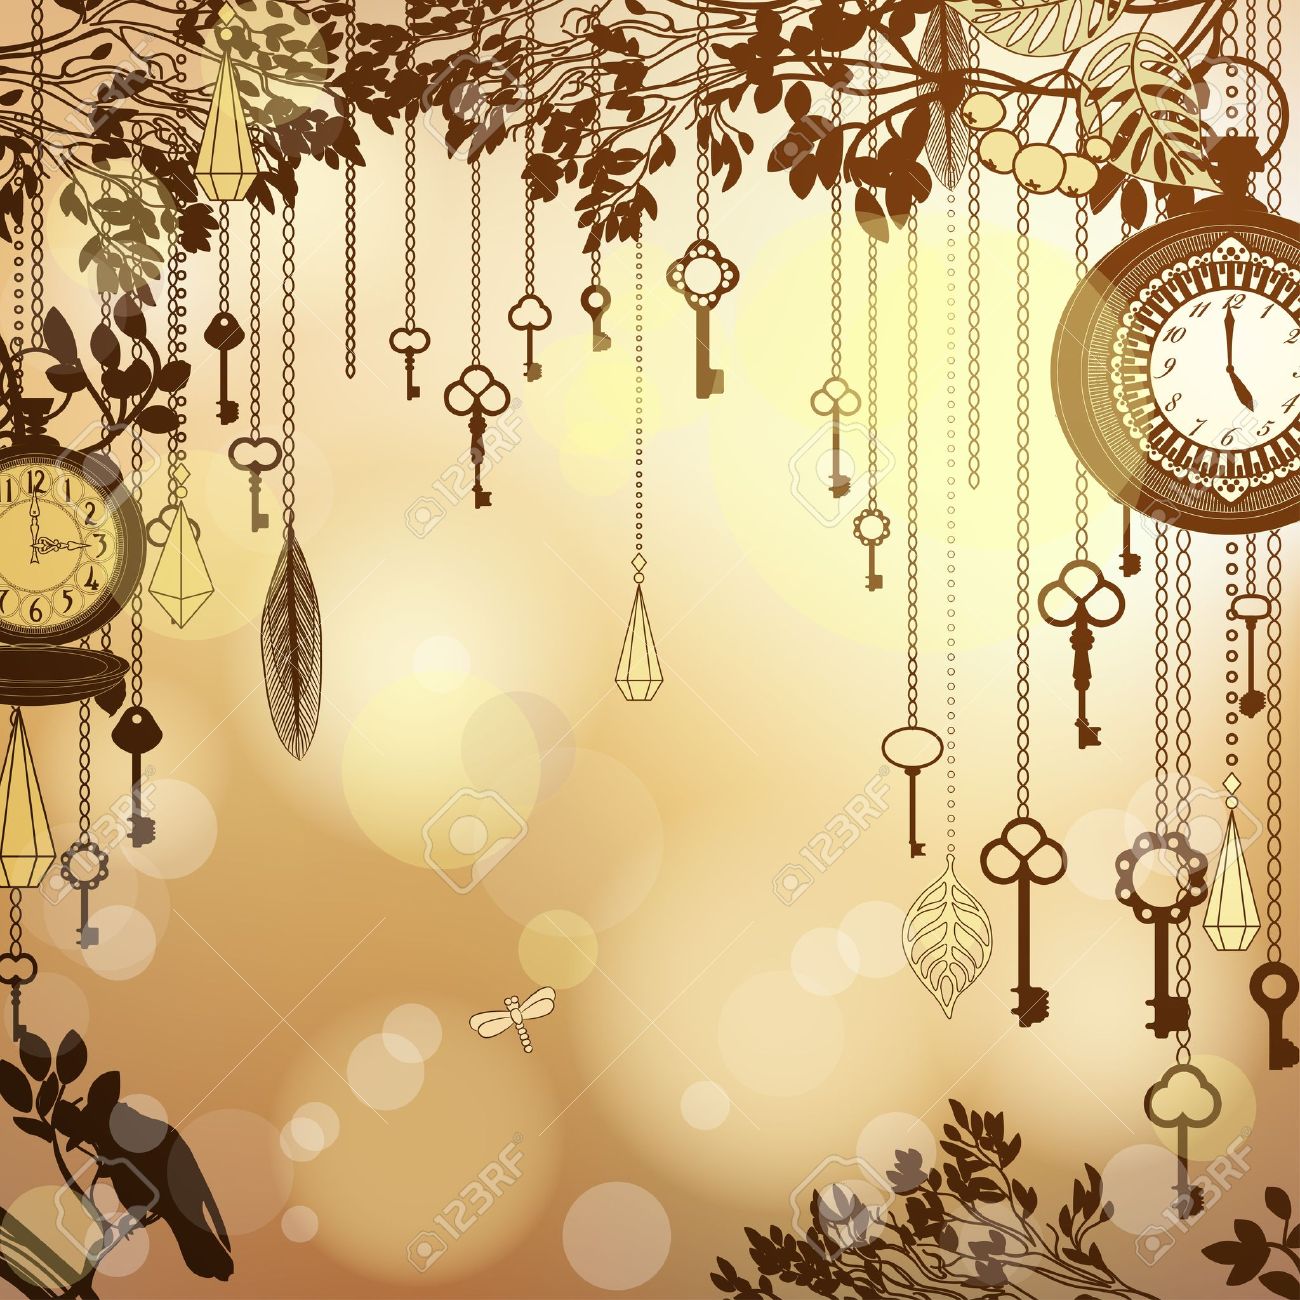 Antique Golden Background With Clocks And Keys Royalty